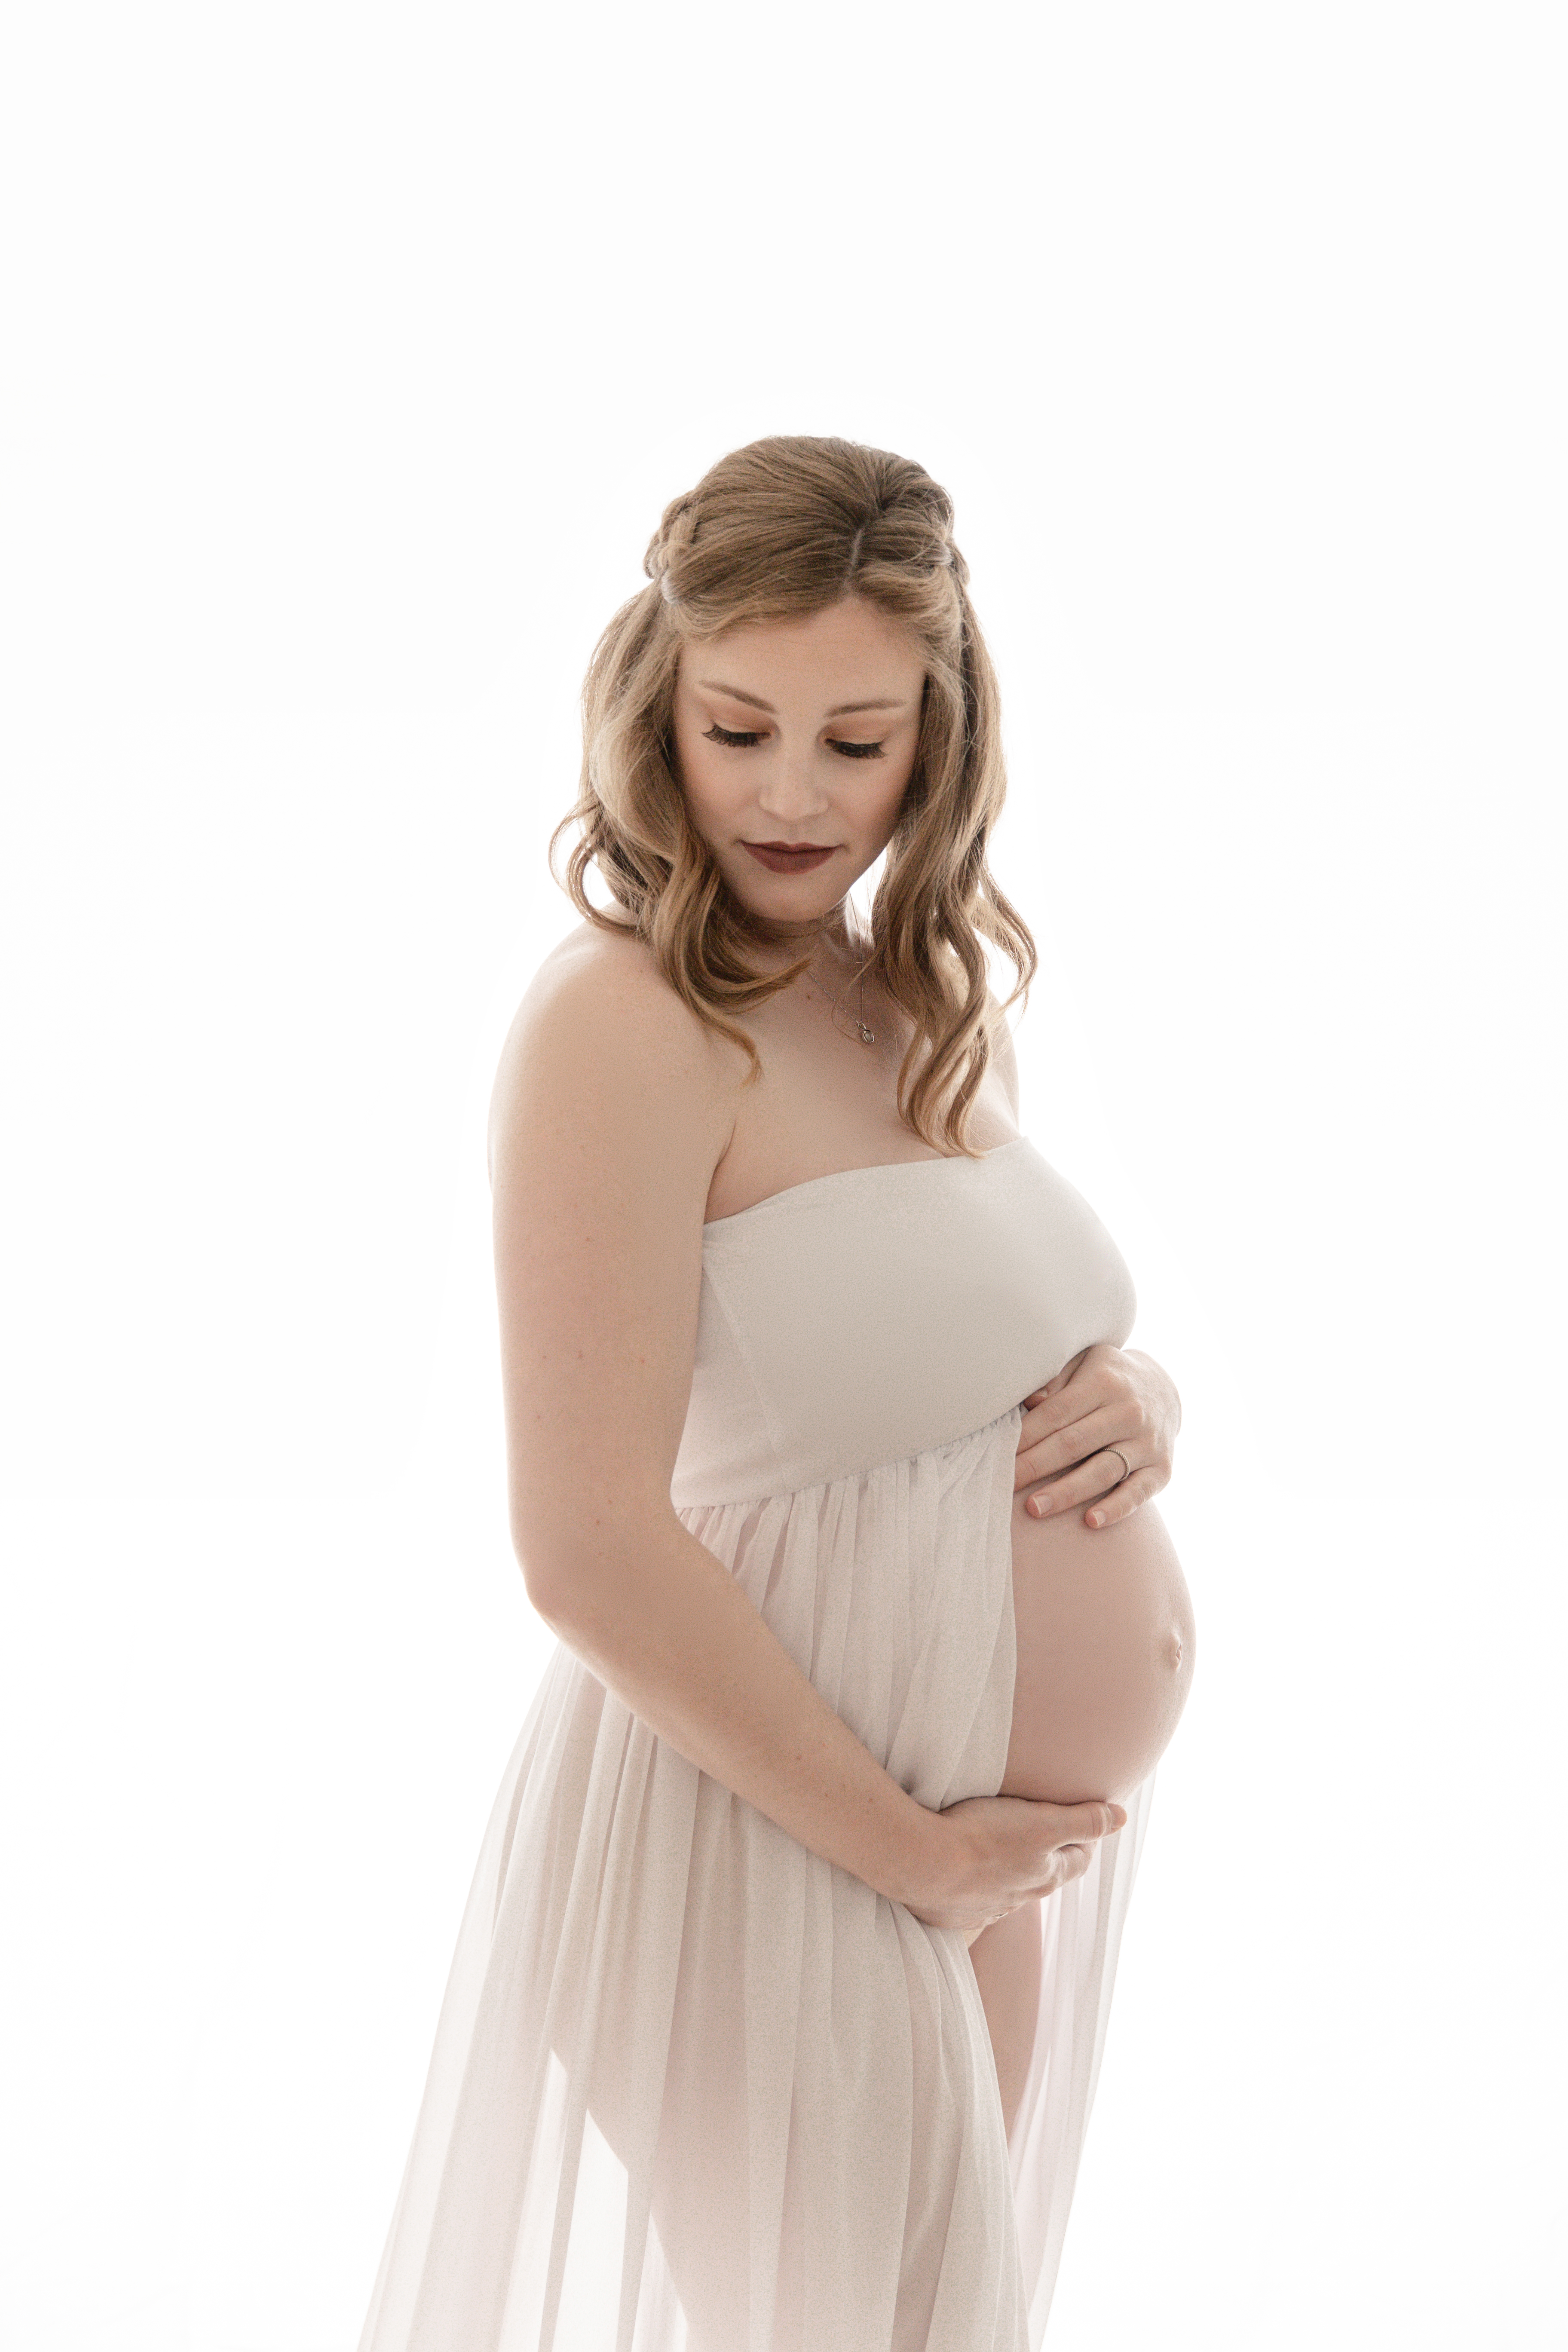 a pregnant maternity model infront of a white backdrop